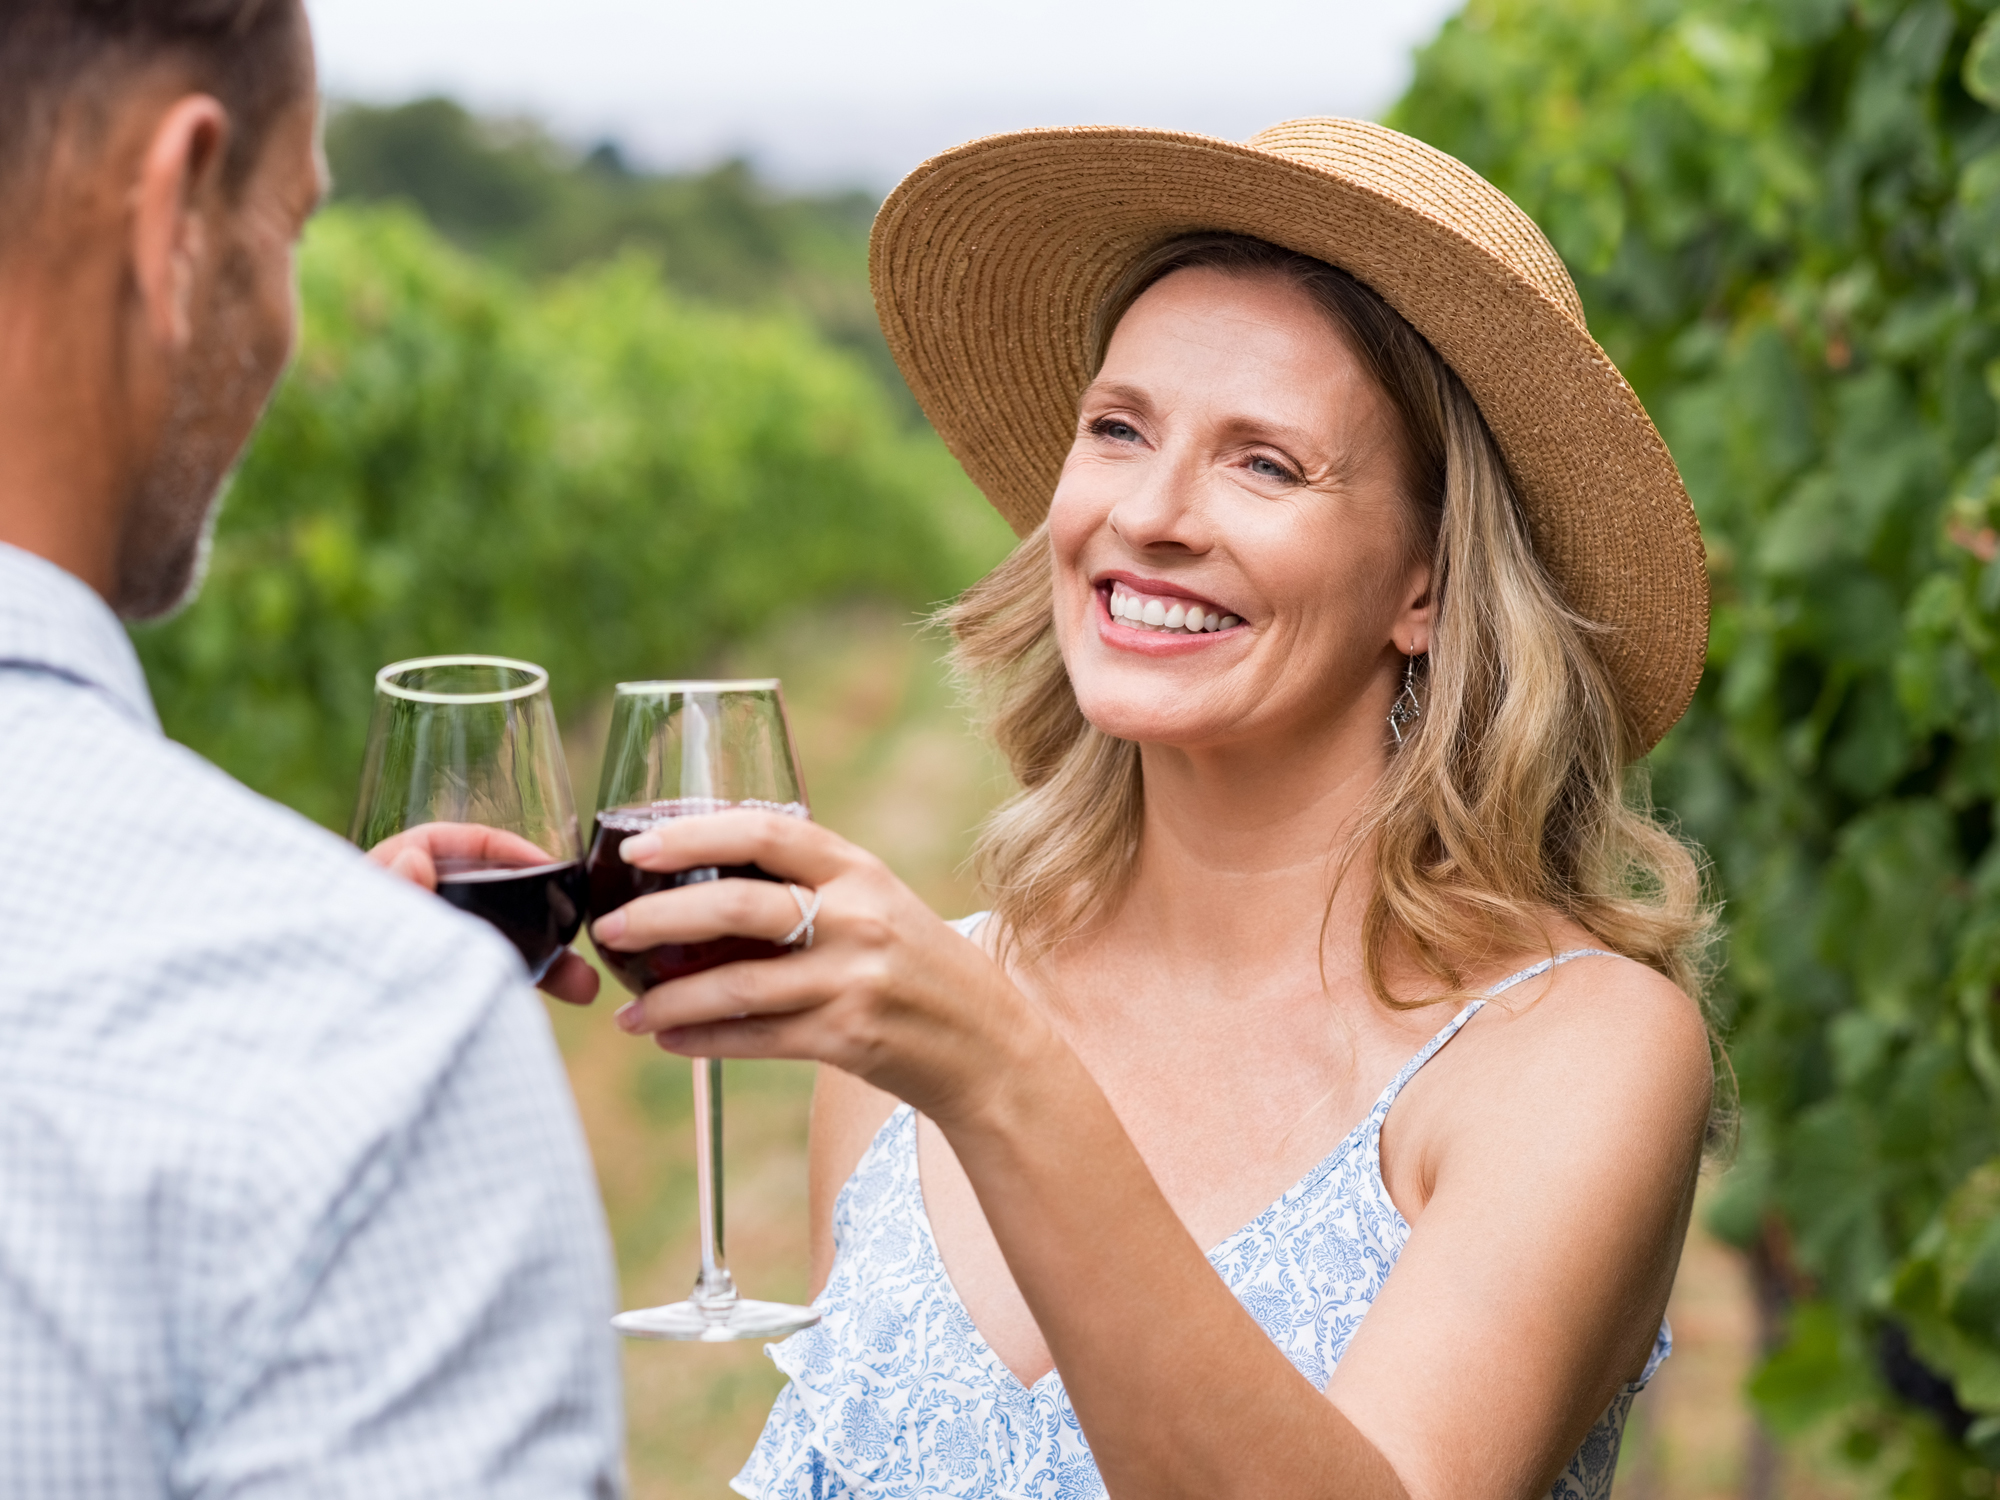 Why red wine drinkers have healthier guts